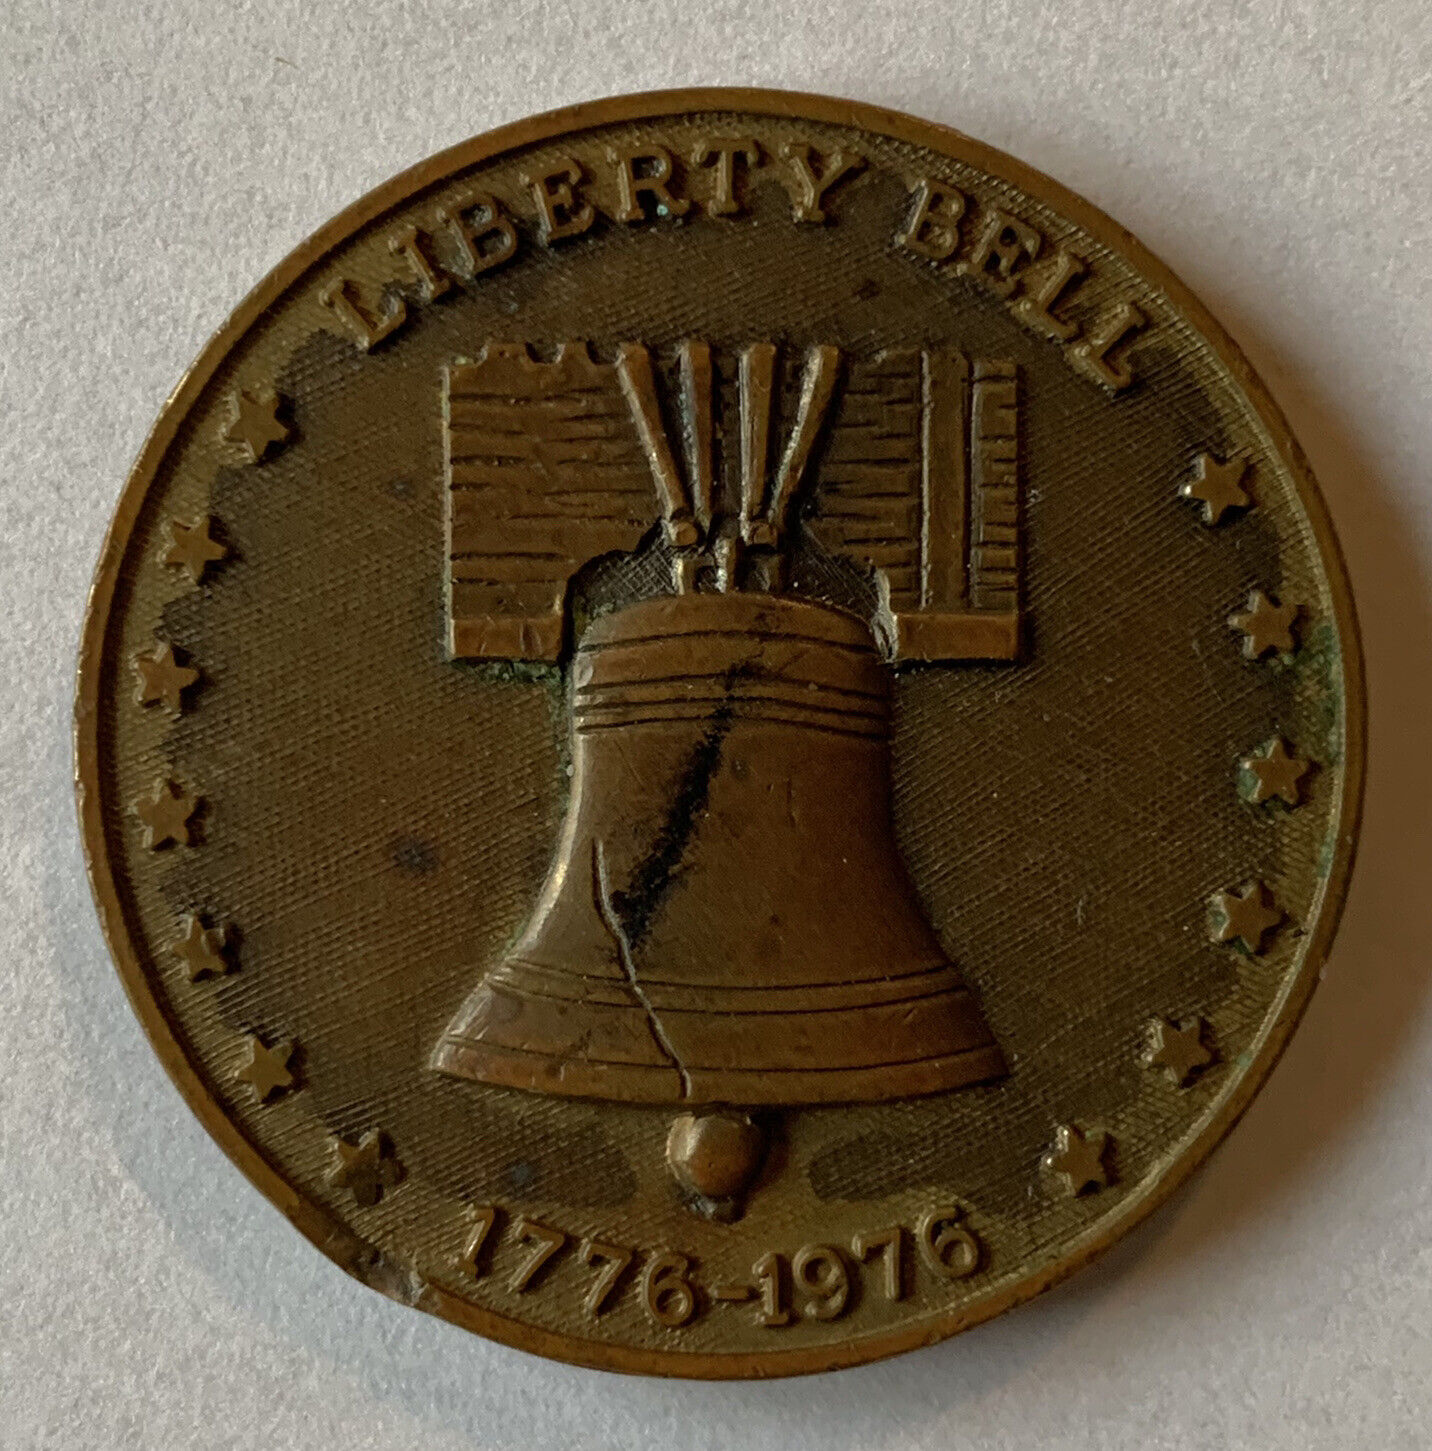 Don't Tread On Me Liberty Bell Coin | USAMM